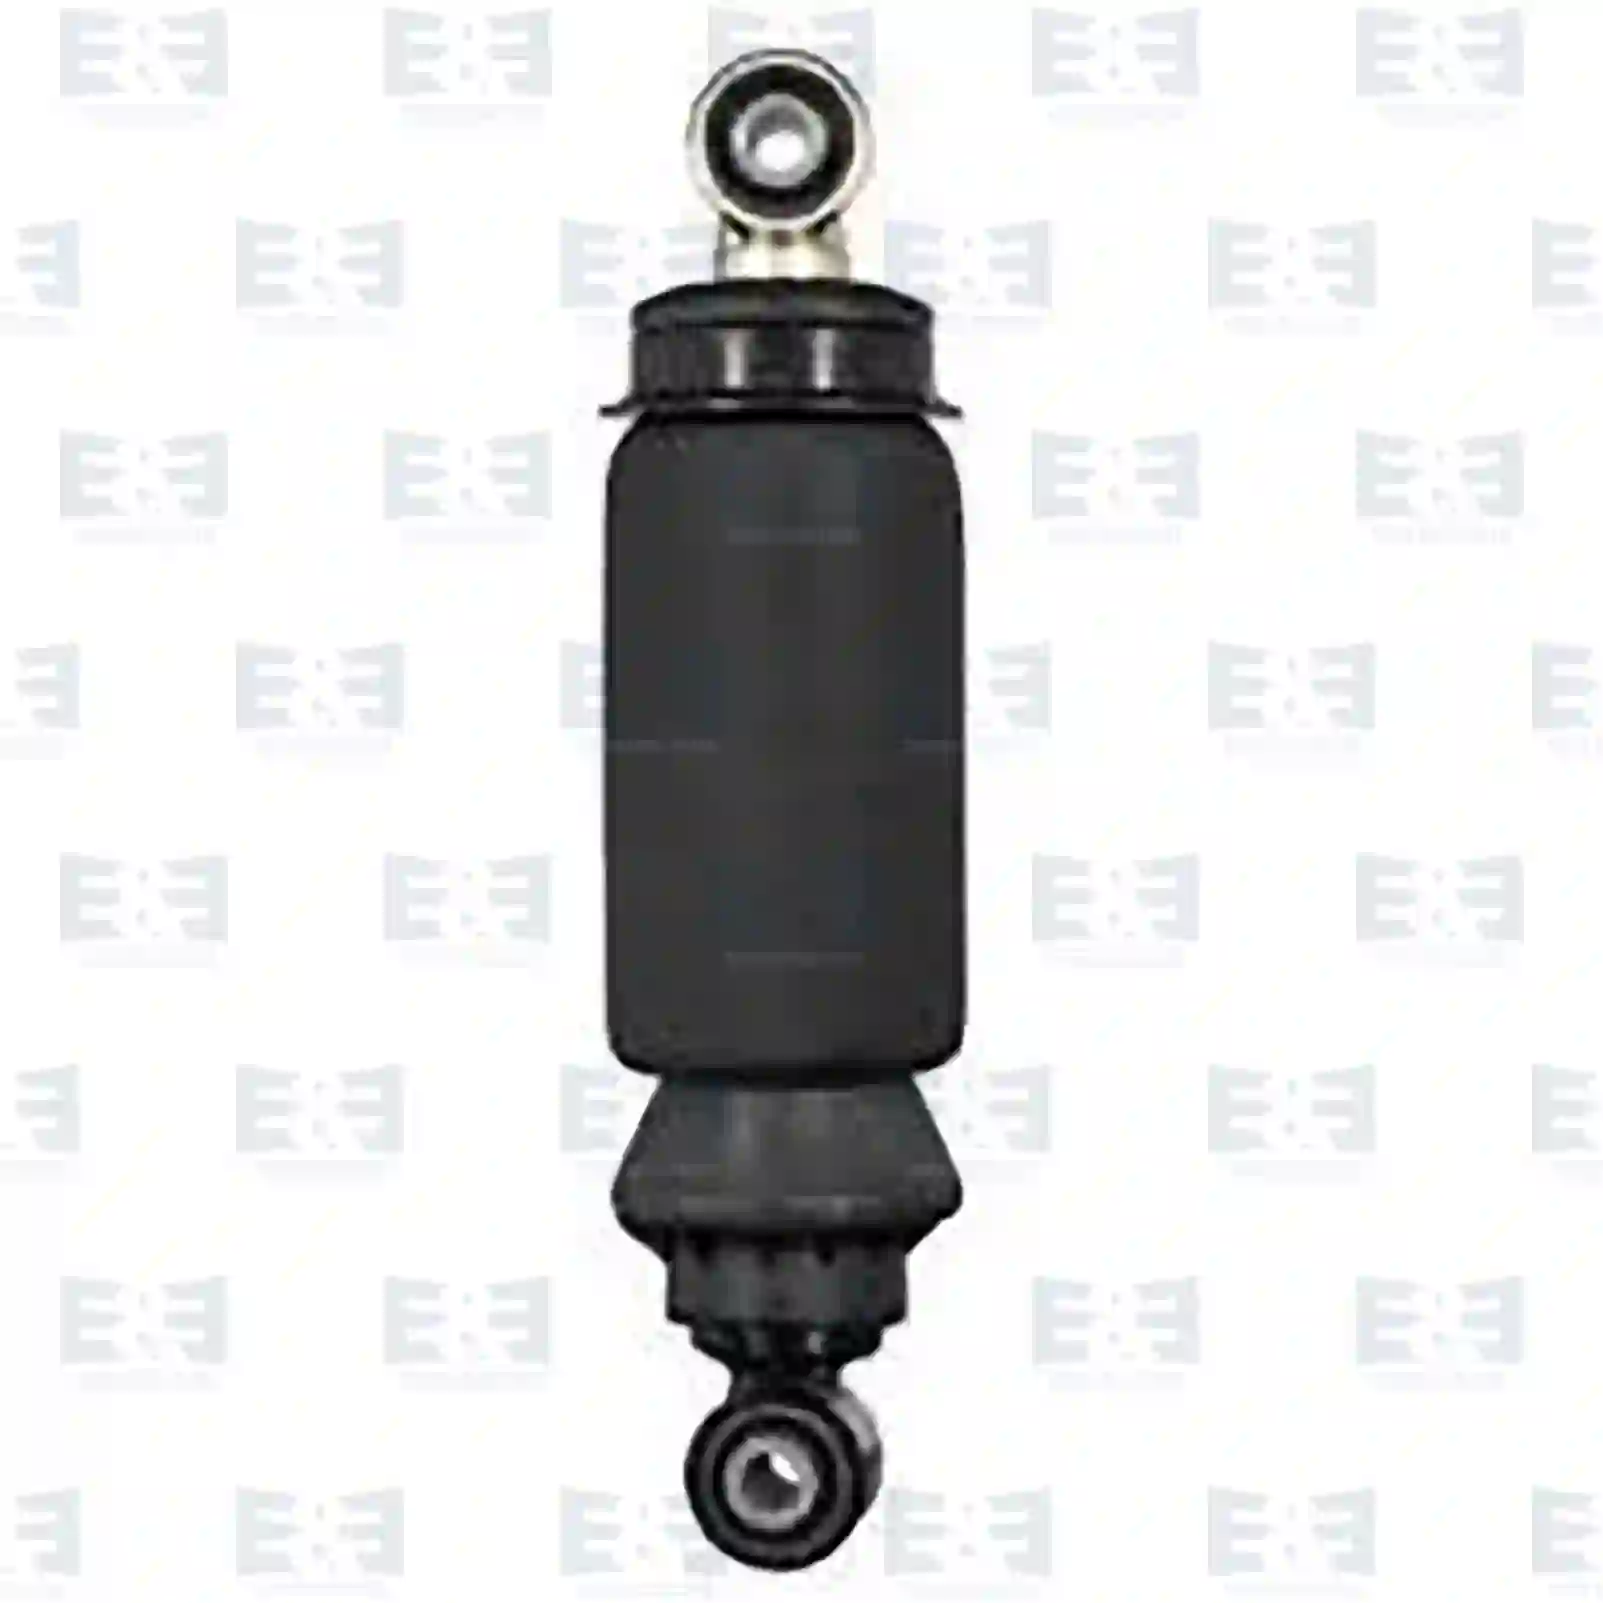 Cabin shock absorber, with air bellow, 2E2276194, 9408904919 ||  2E2276194 E&E Truck Spare Parts | Truck Spare Parts, Auotomotive Spare Parts Cabin shock absorber, with air bellow, 2E2276194, 9408904919 ||  2E2276194 E&E Truck Spare Parts | Truck Spare Parts, Auotomotive Spare Parts